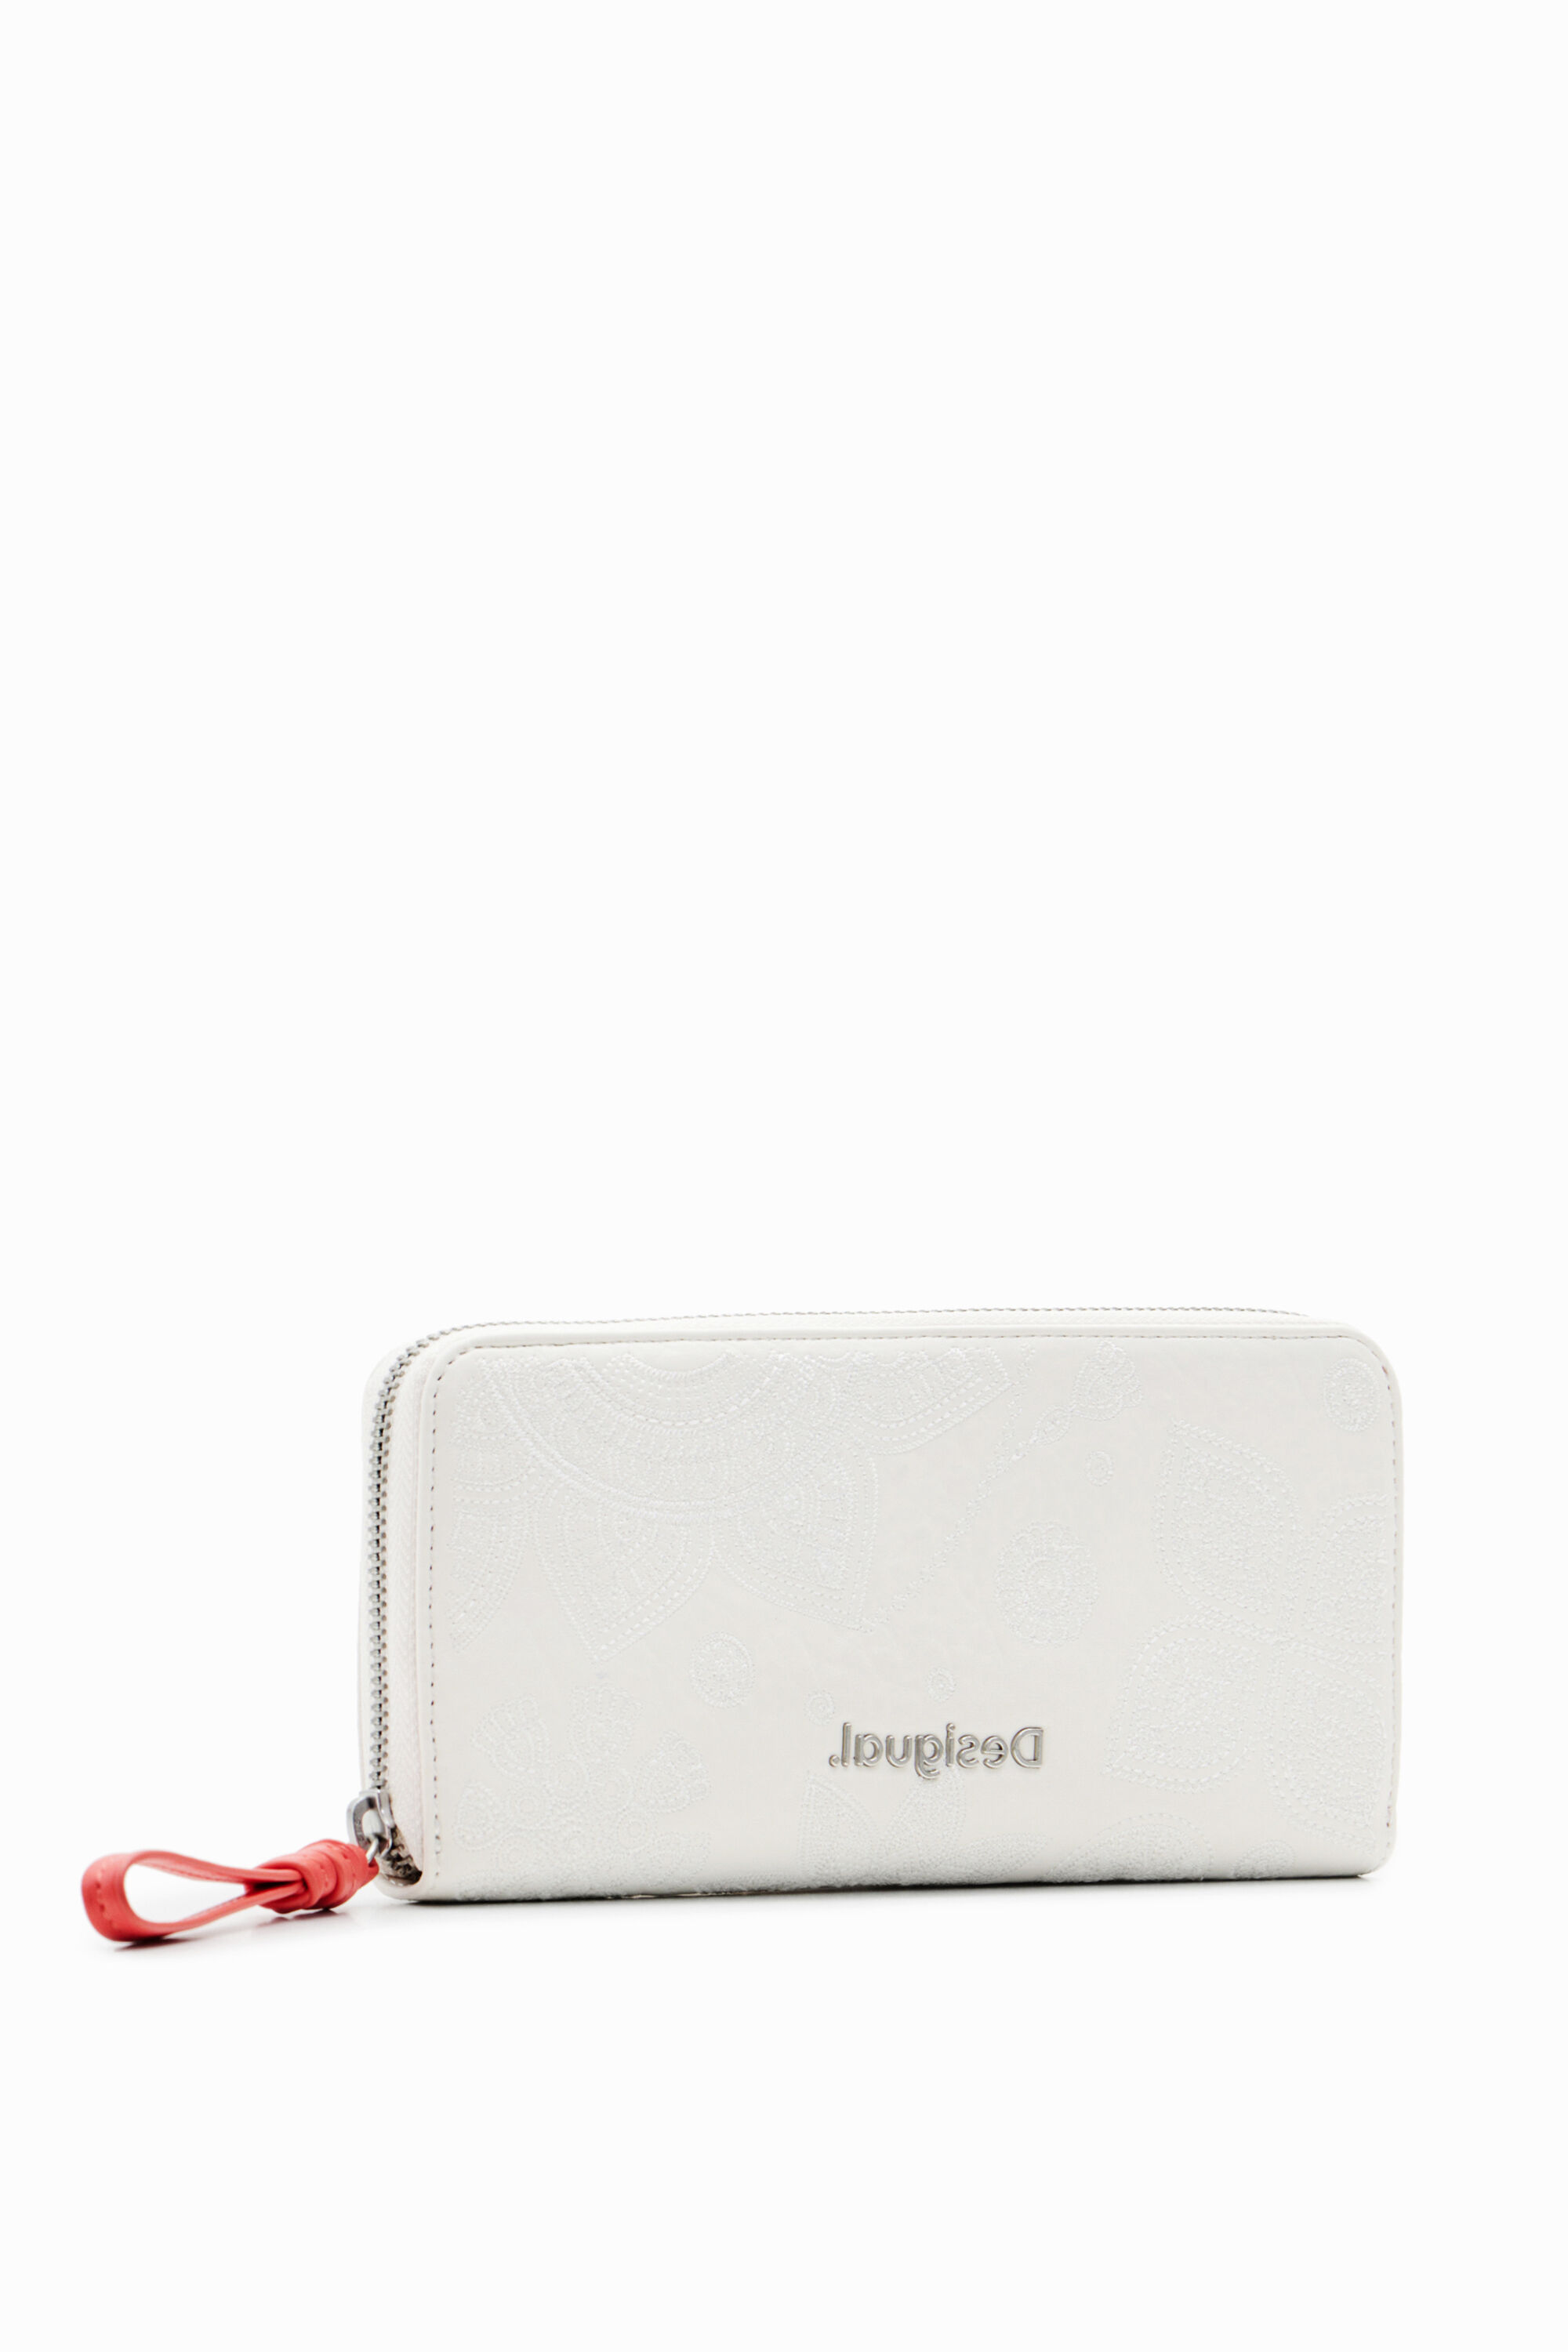 Desigual Large embroidered wallet